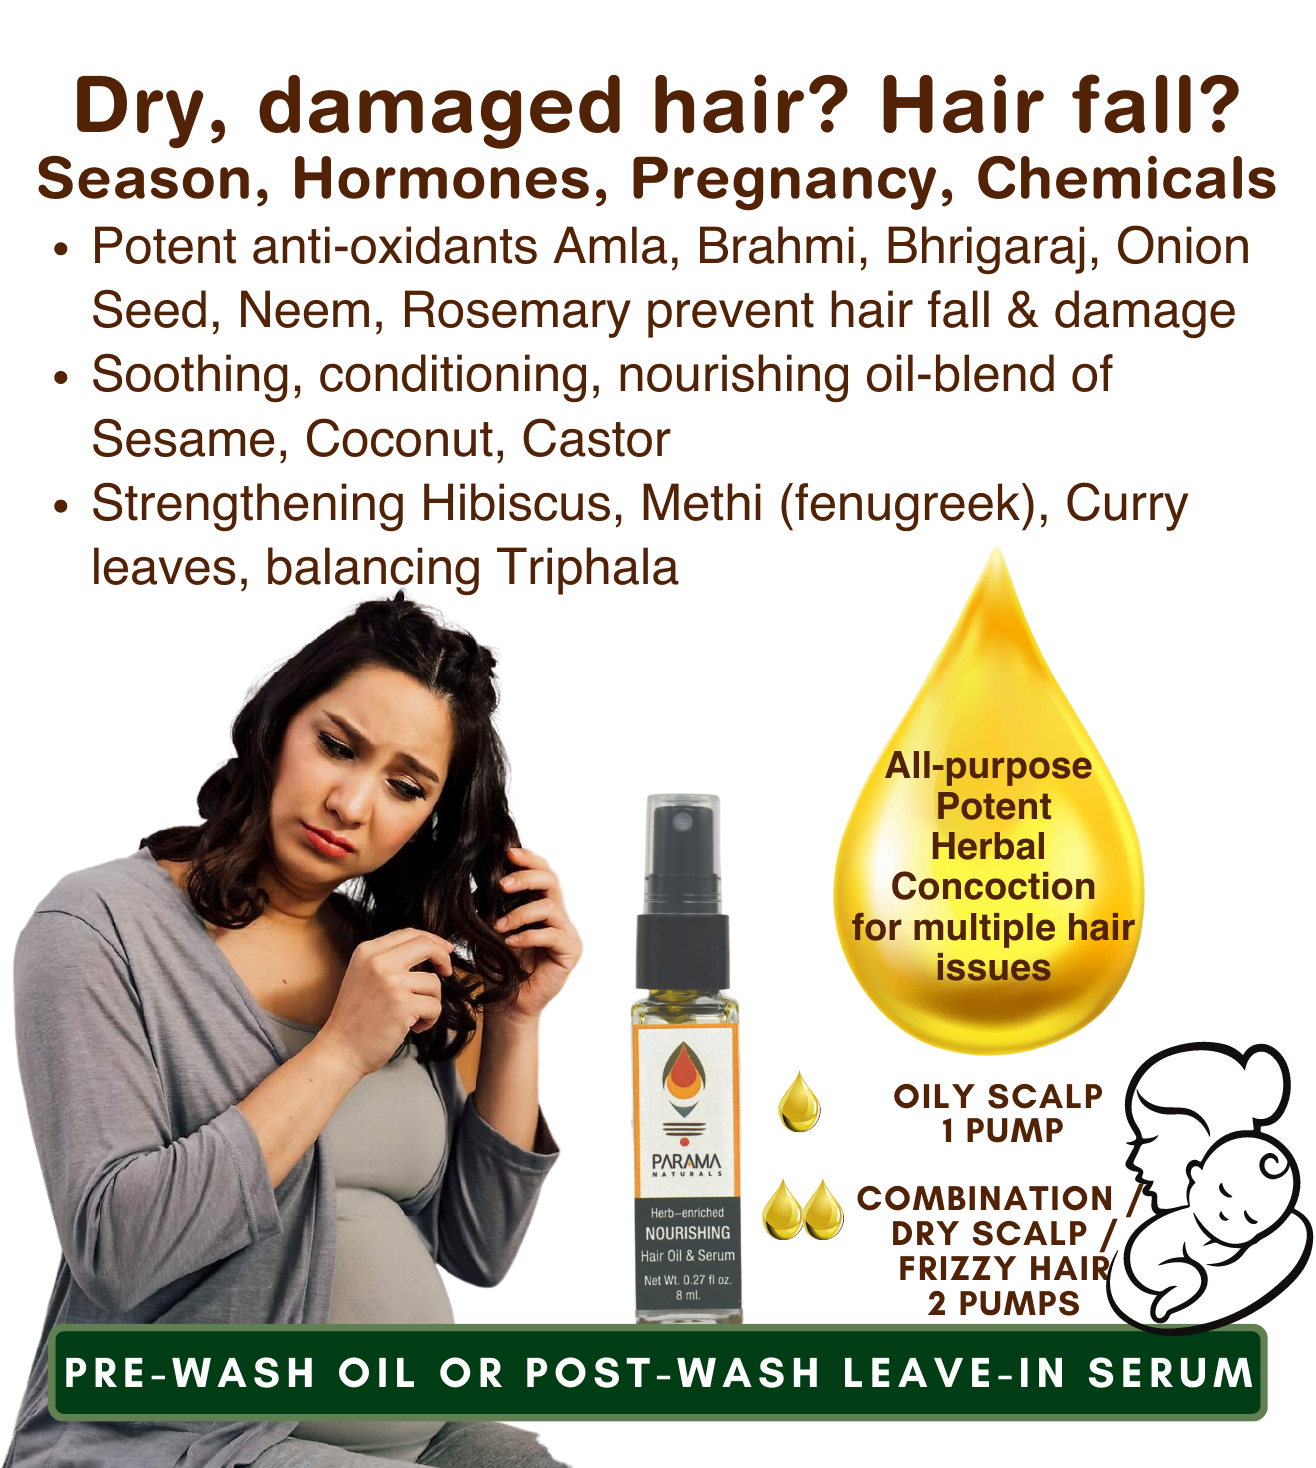 Dry, damaged hair, hair fall, Season, Hormones, Pregnancy, Chemicals, Soothing, conditioning